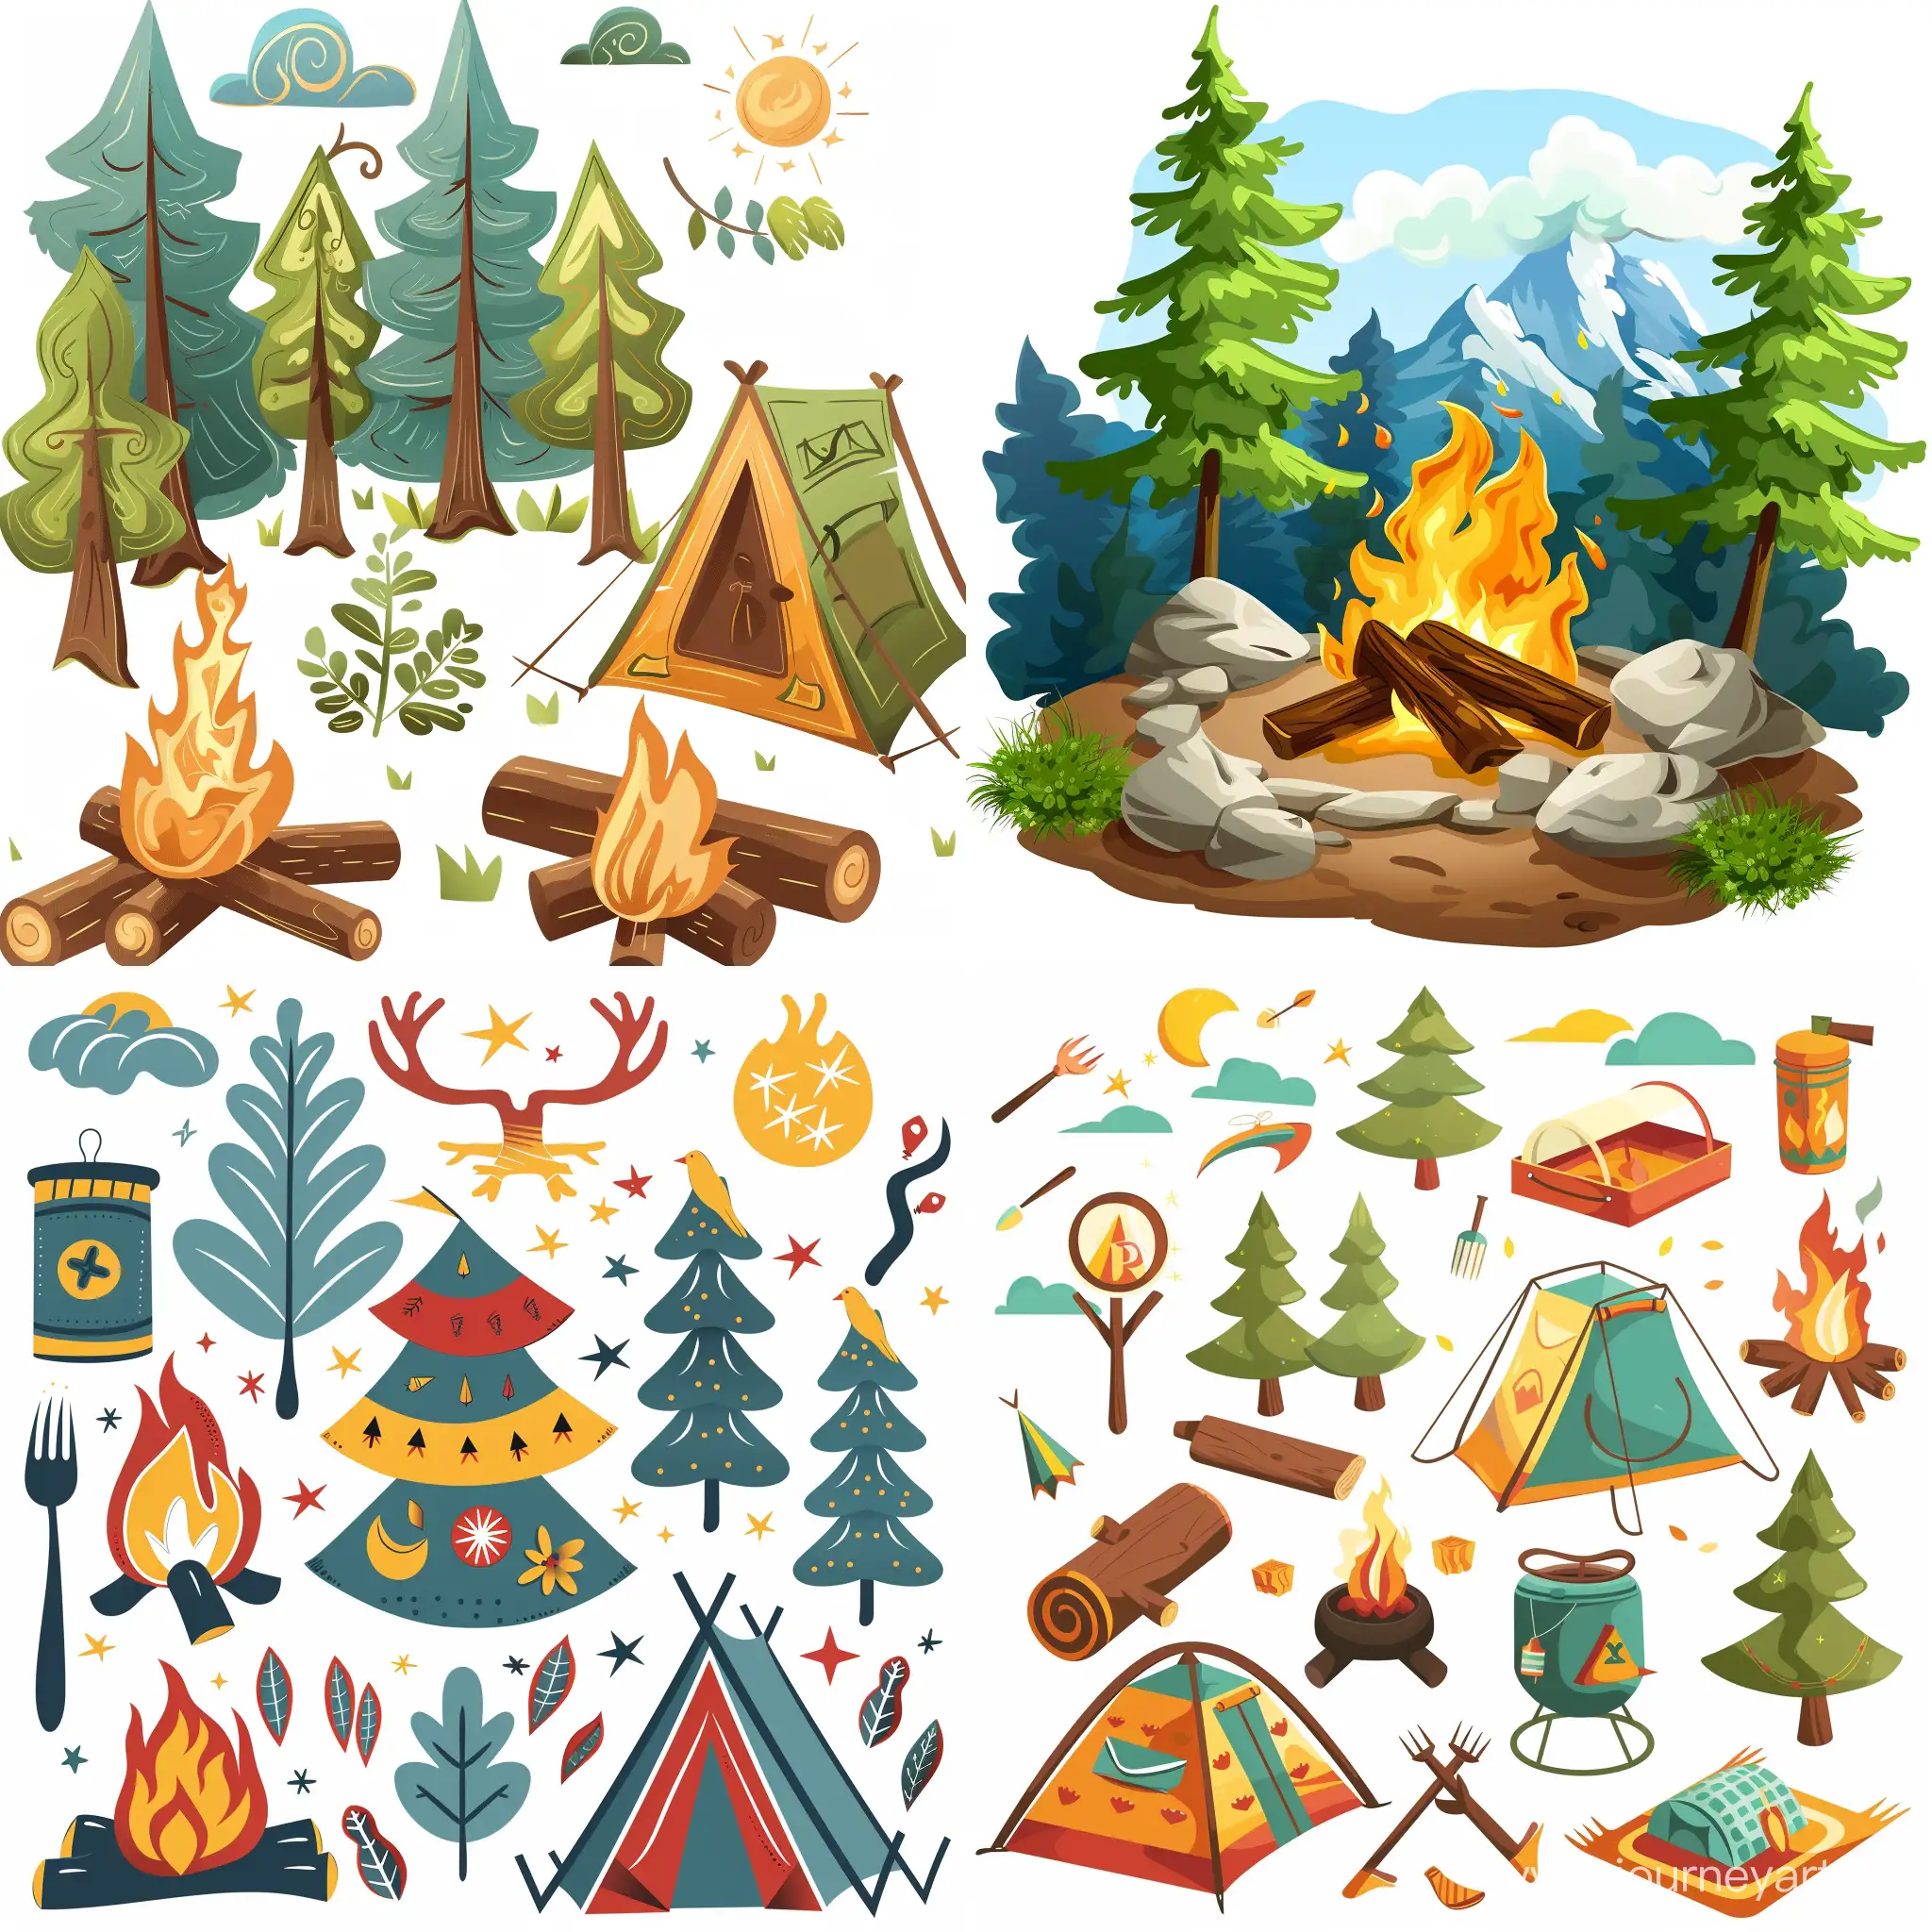 Happy-Family-Camping-Together-in-Wilderness-Outdoor-Adventure-Clipart